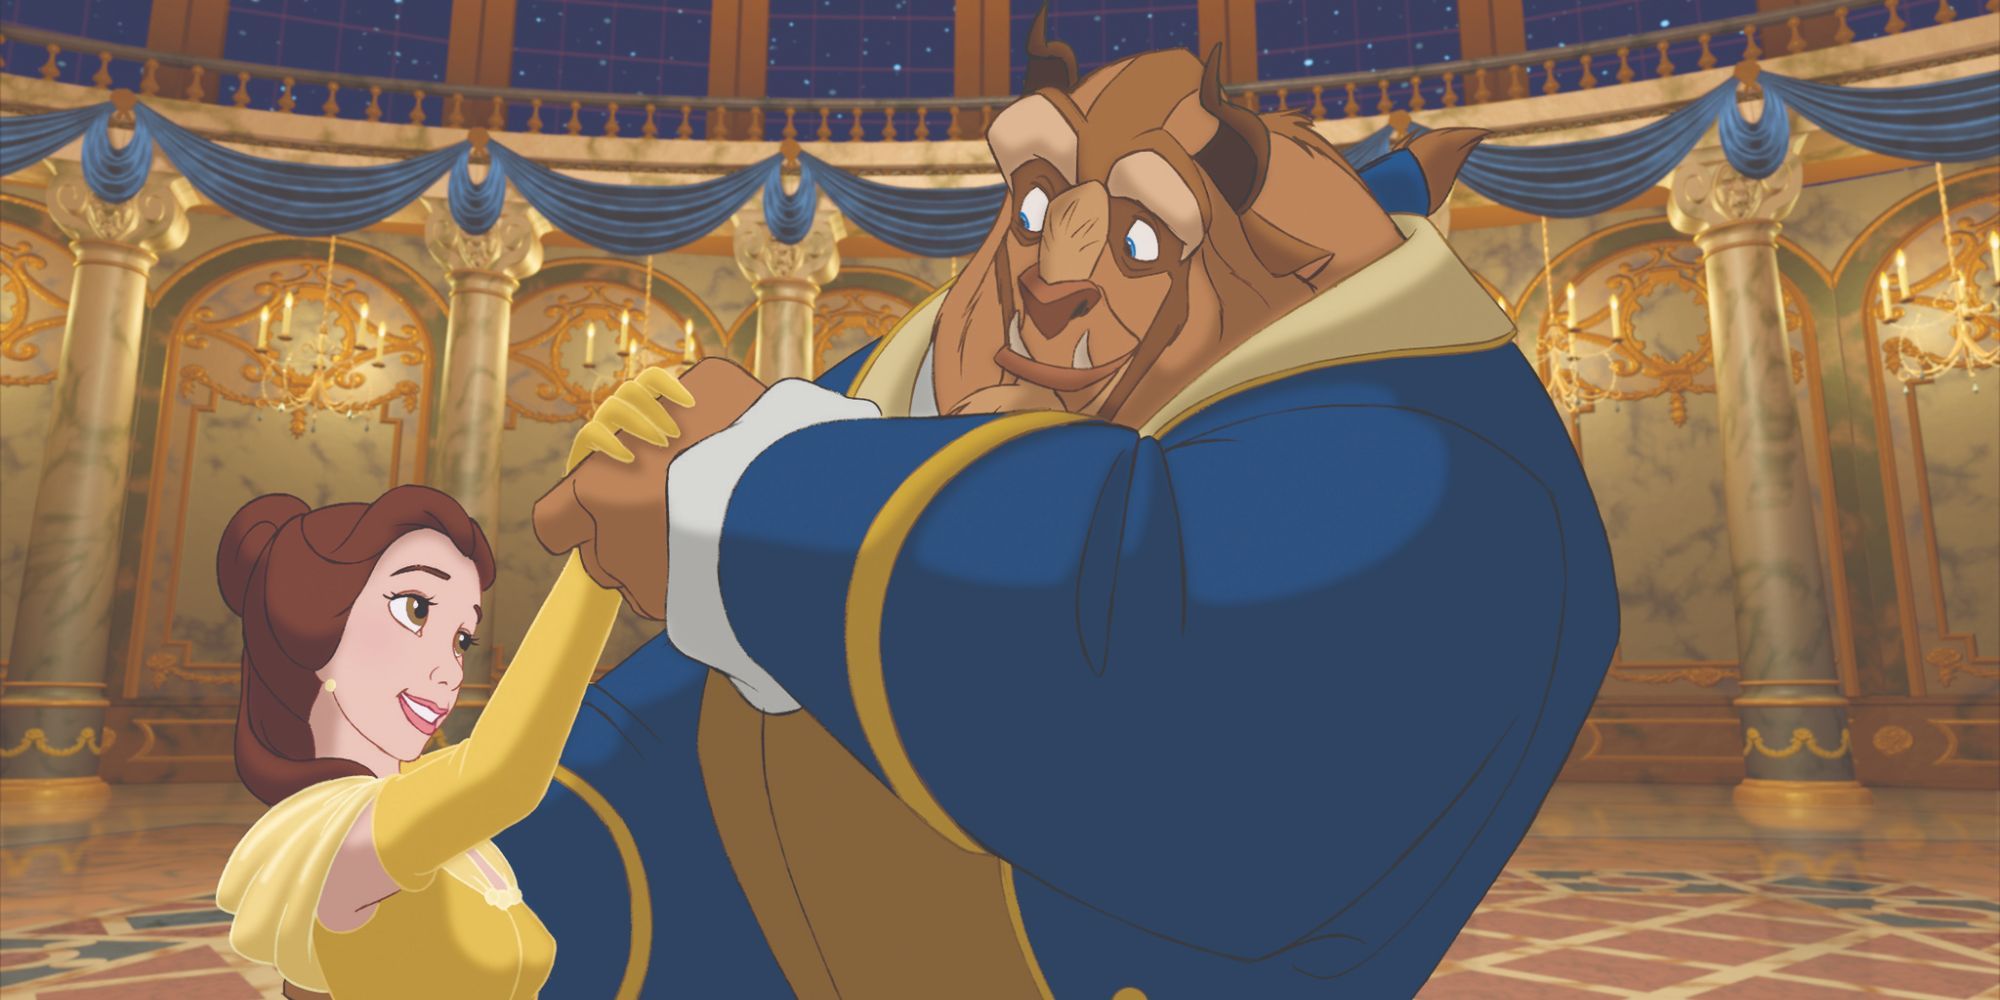 Belle dancing with the Beast in Beauty and the Beast